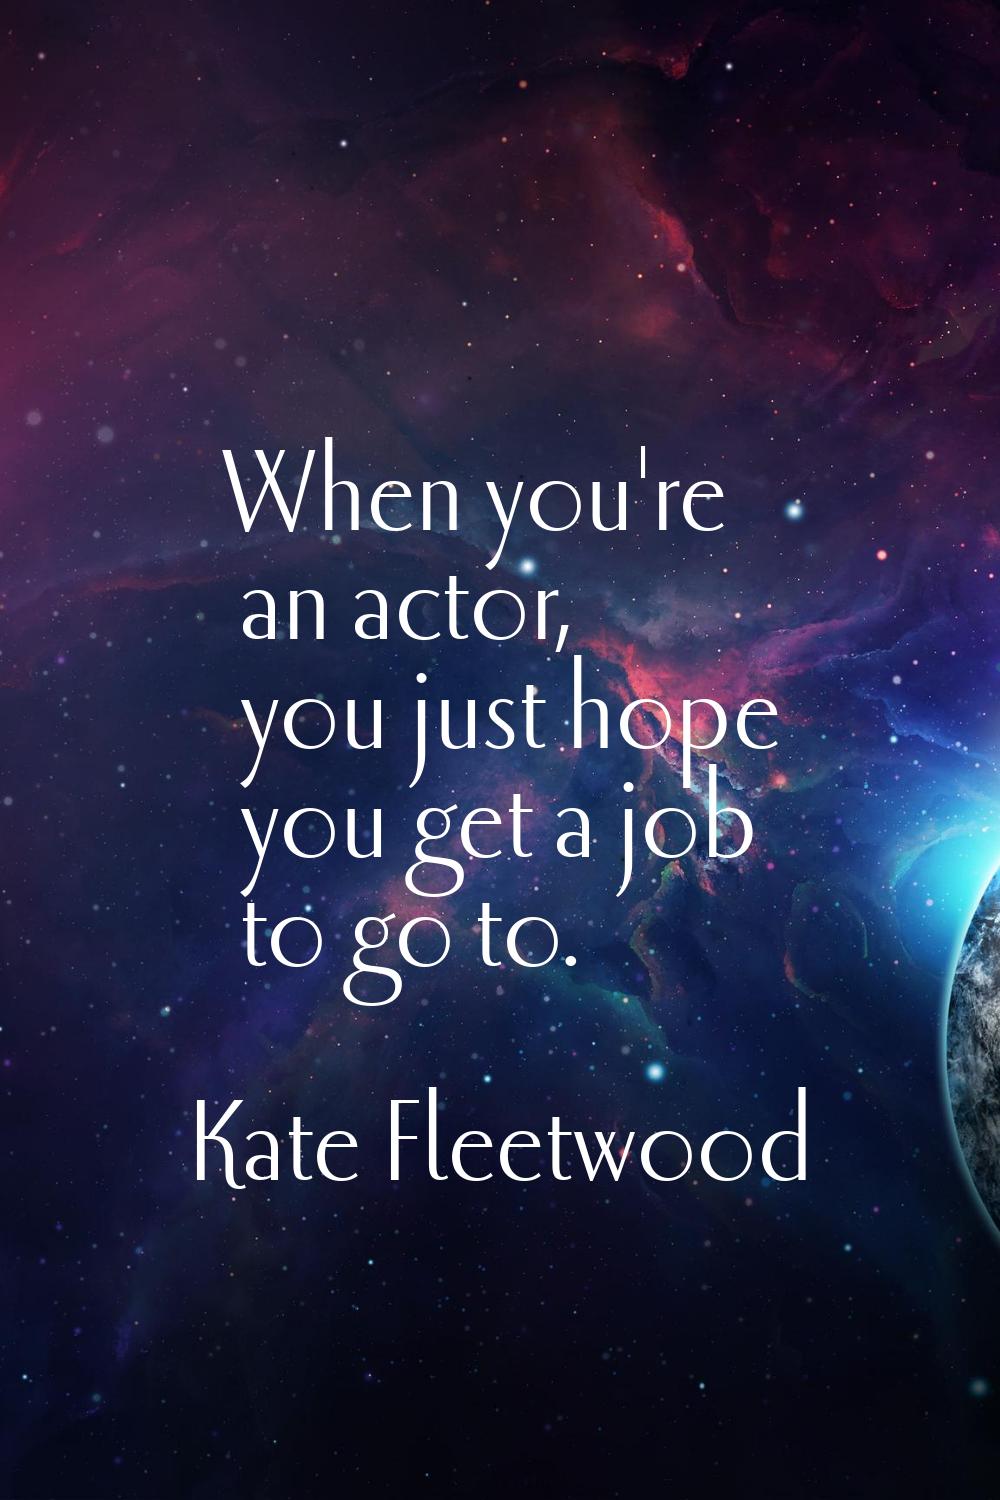 When you're an actor, you just hope you get a job to go to.